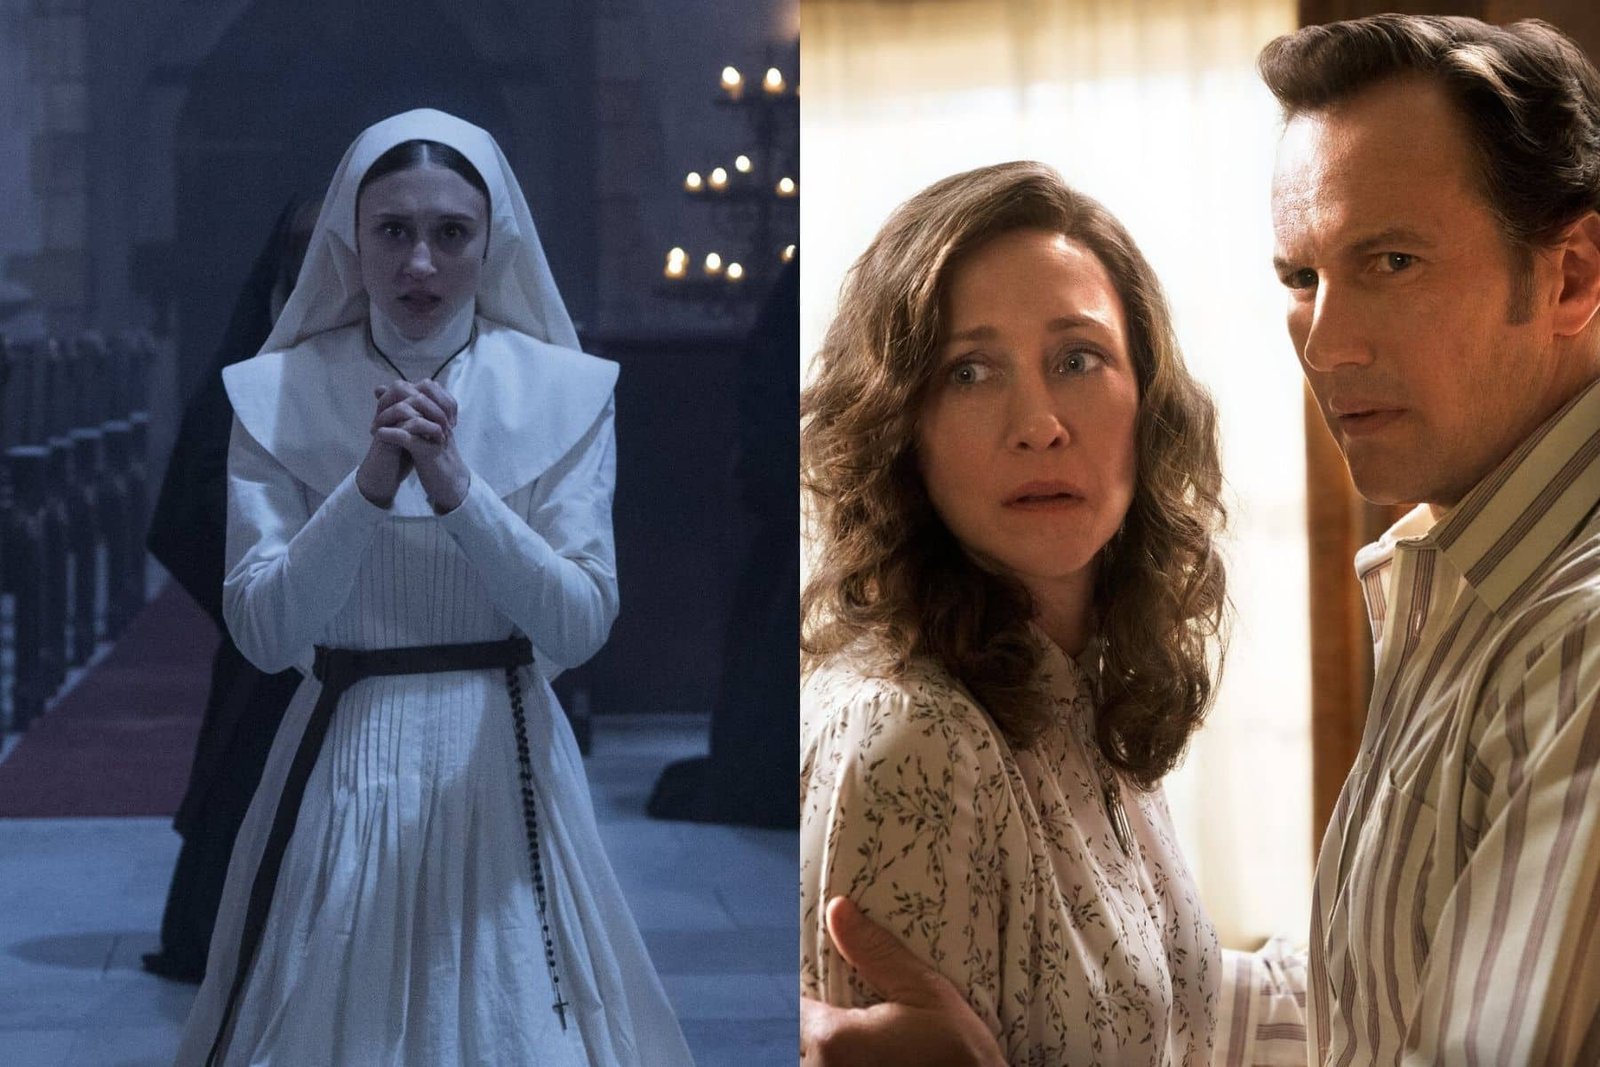 Is The Nun and The Conjuring connected?